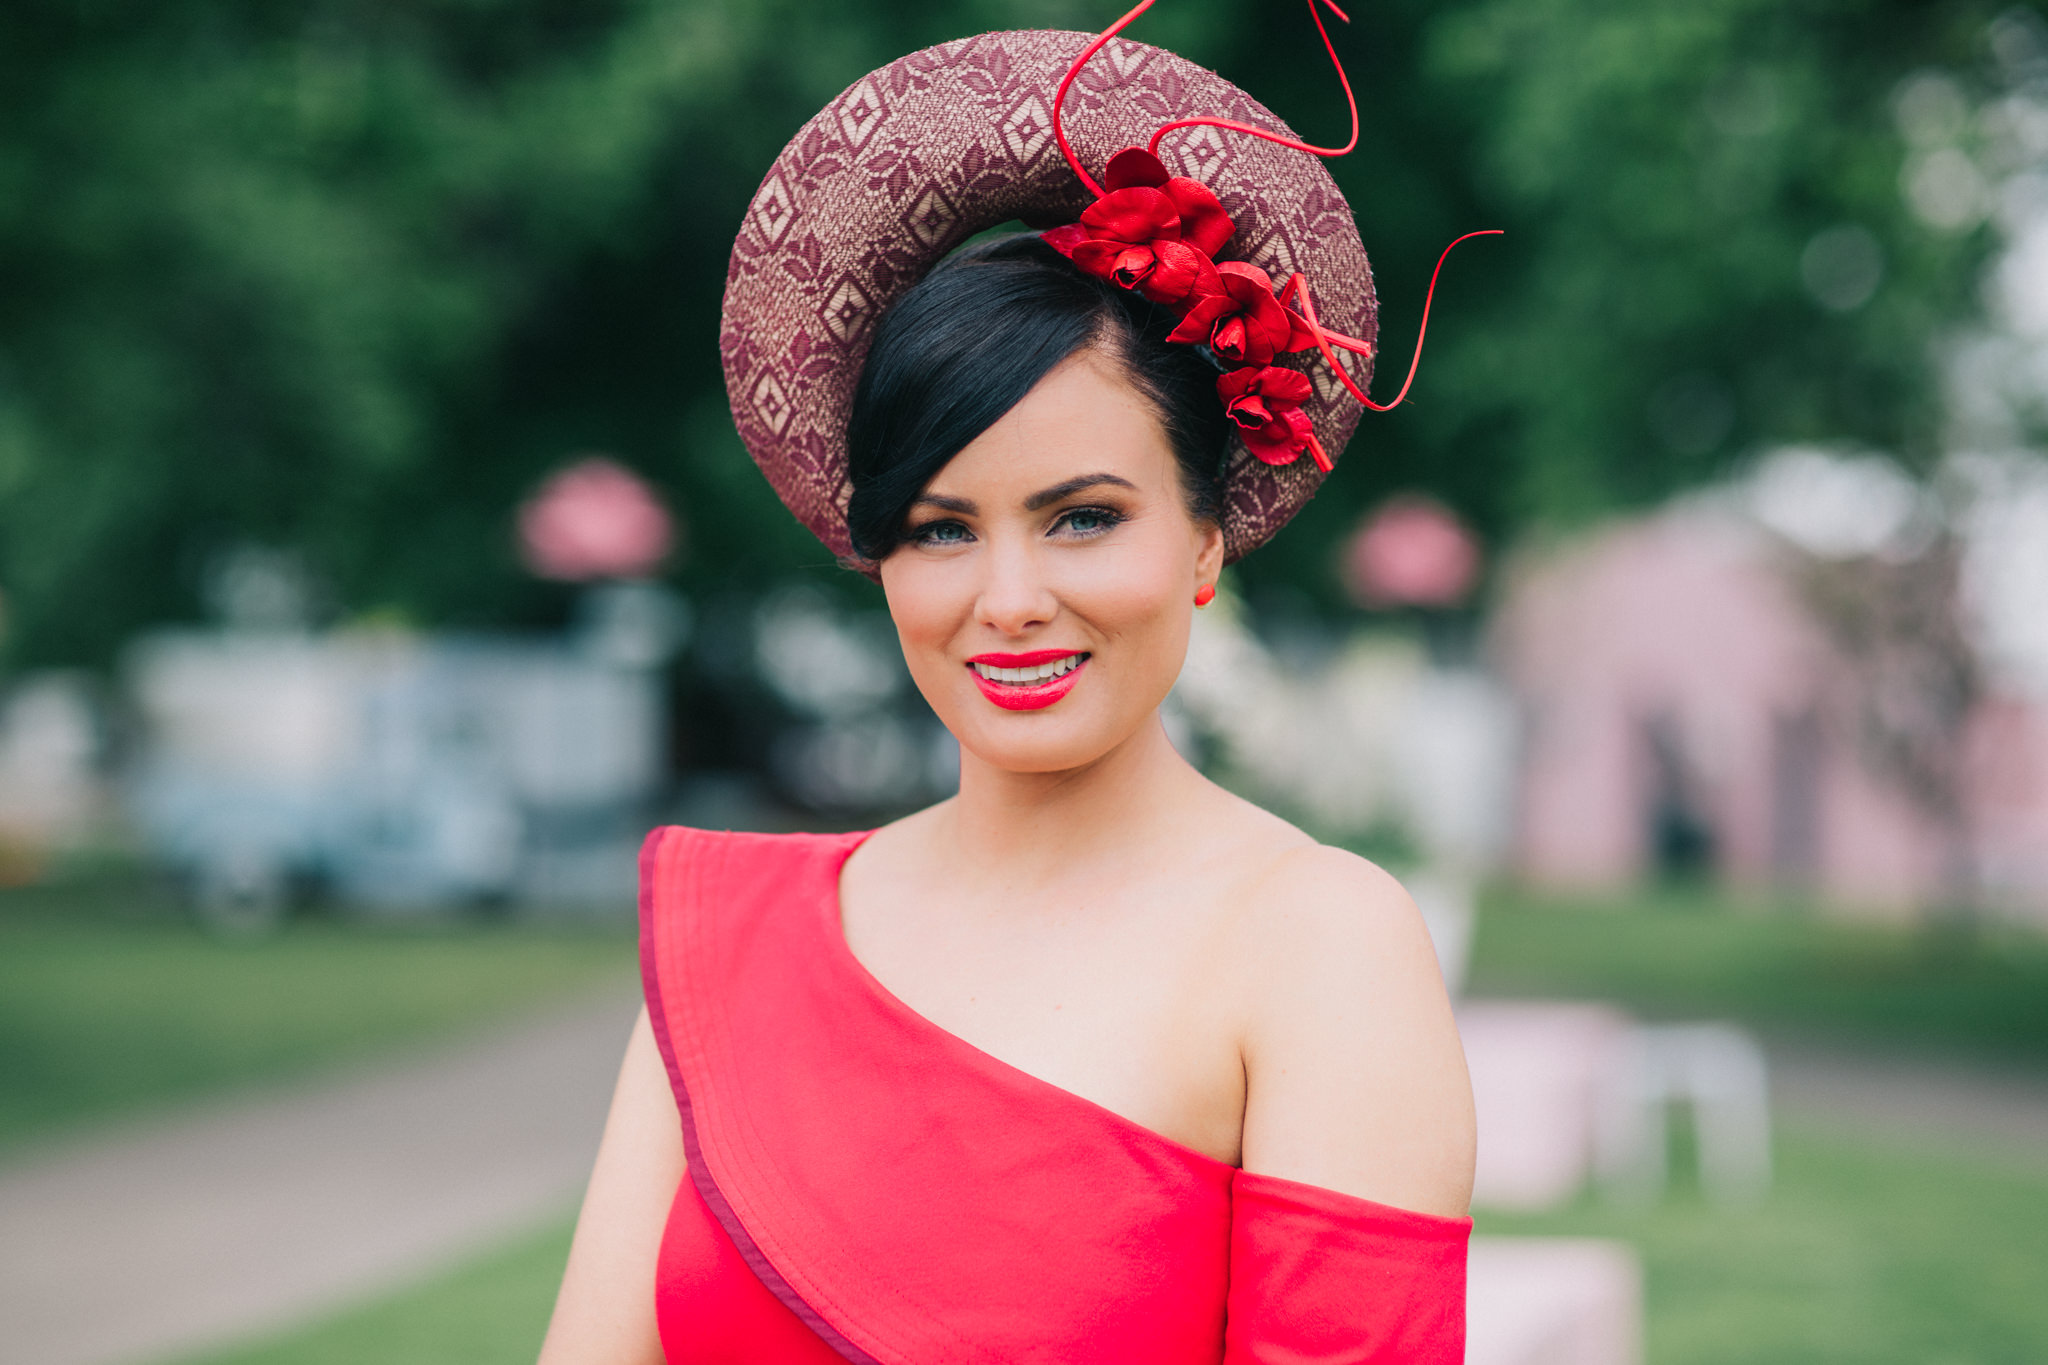 Best photos of the fashions on the field winners 